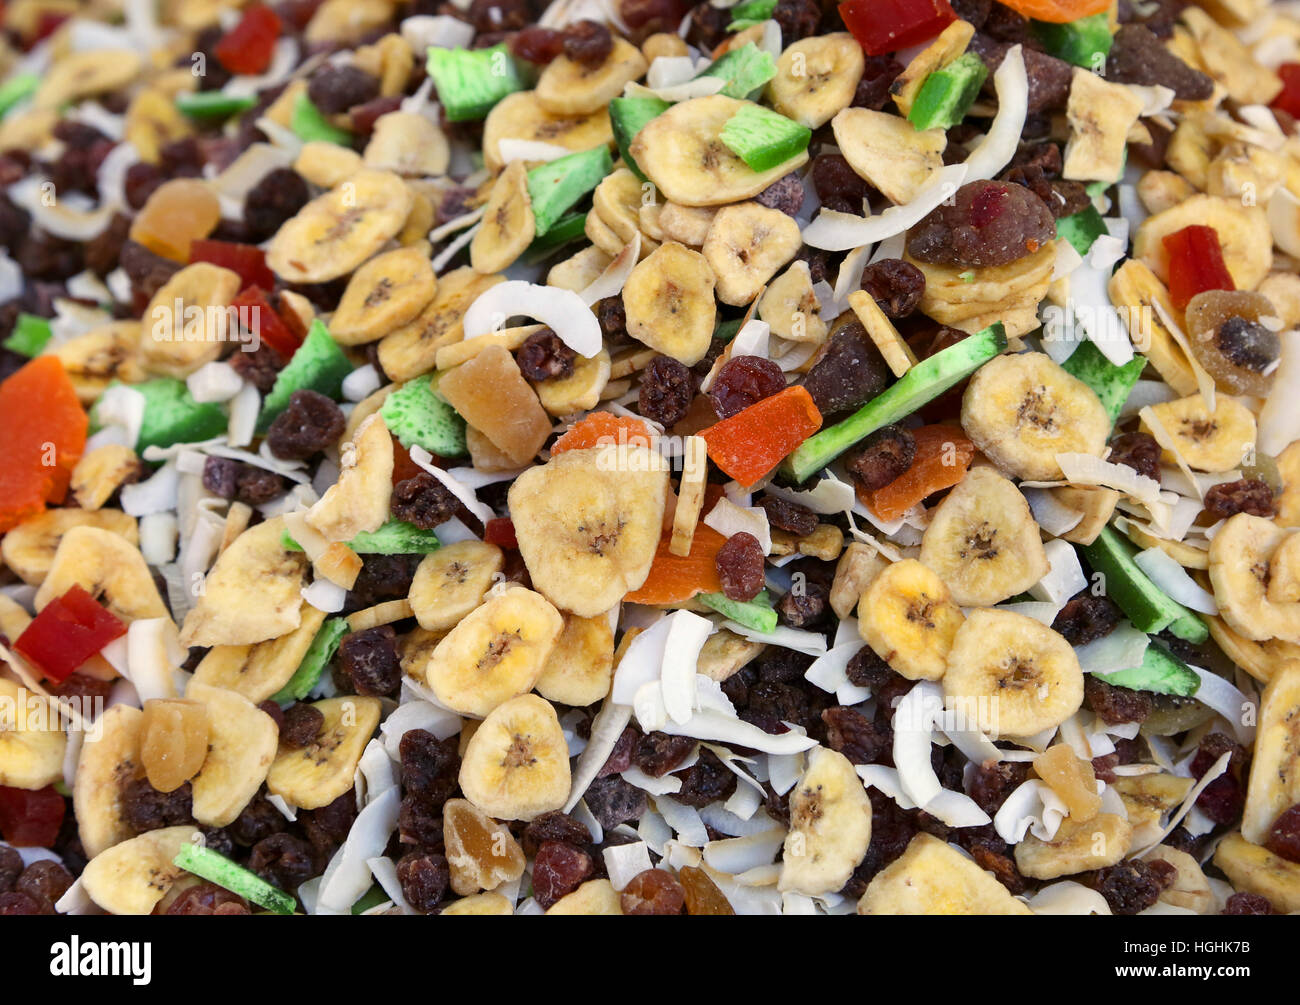 background with a lot of dried fruit with banana coconut and other tropical fruits for sale at market Stock Photo